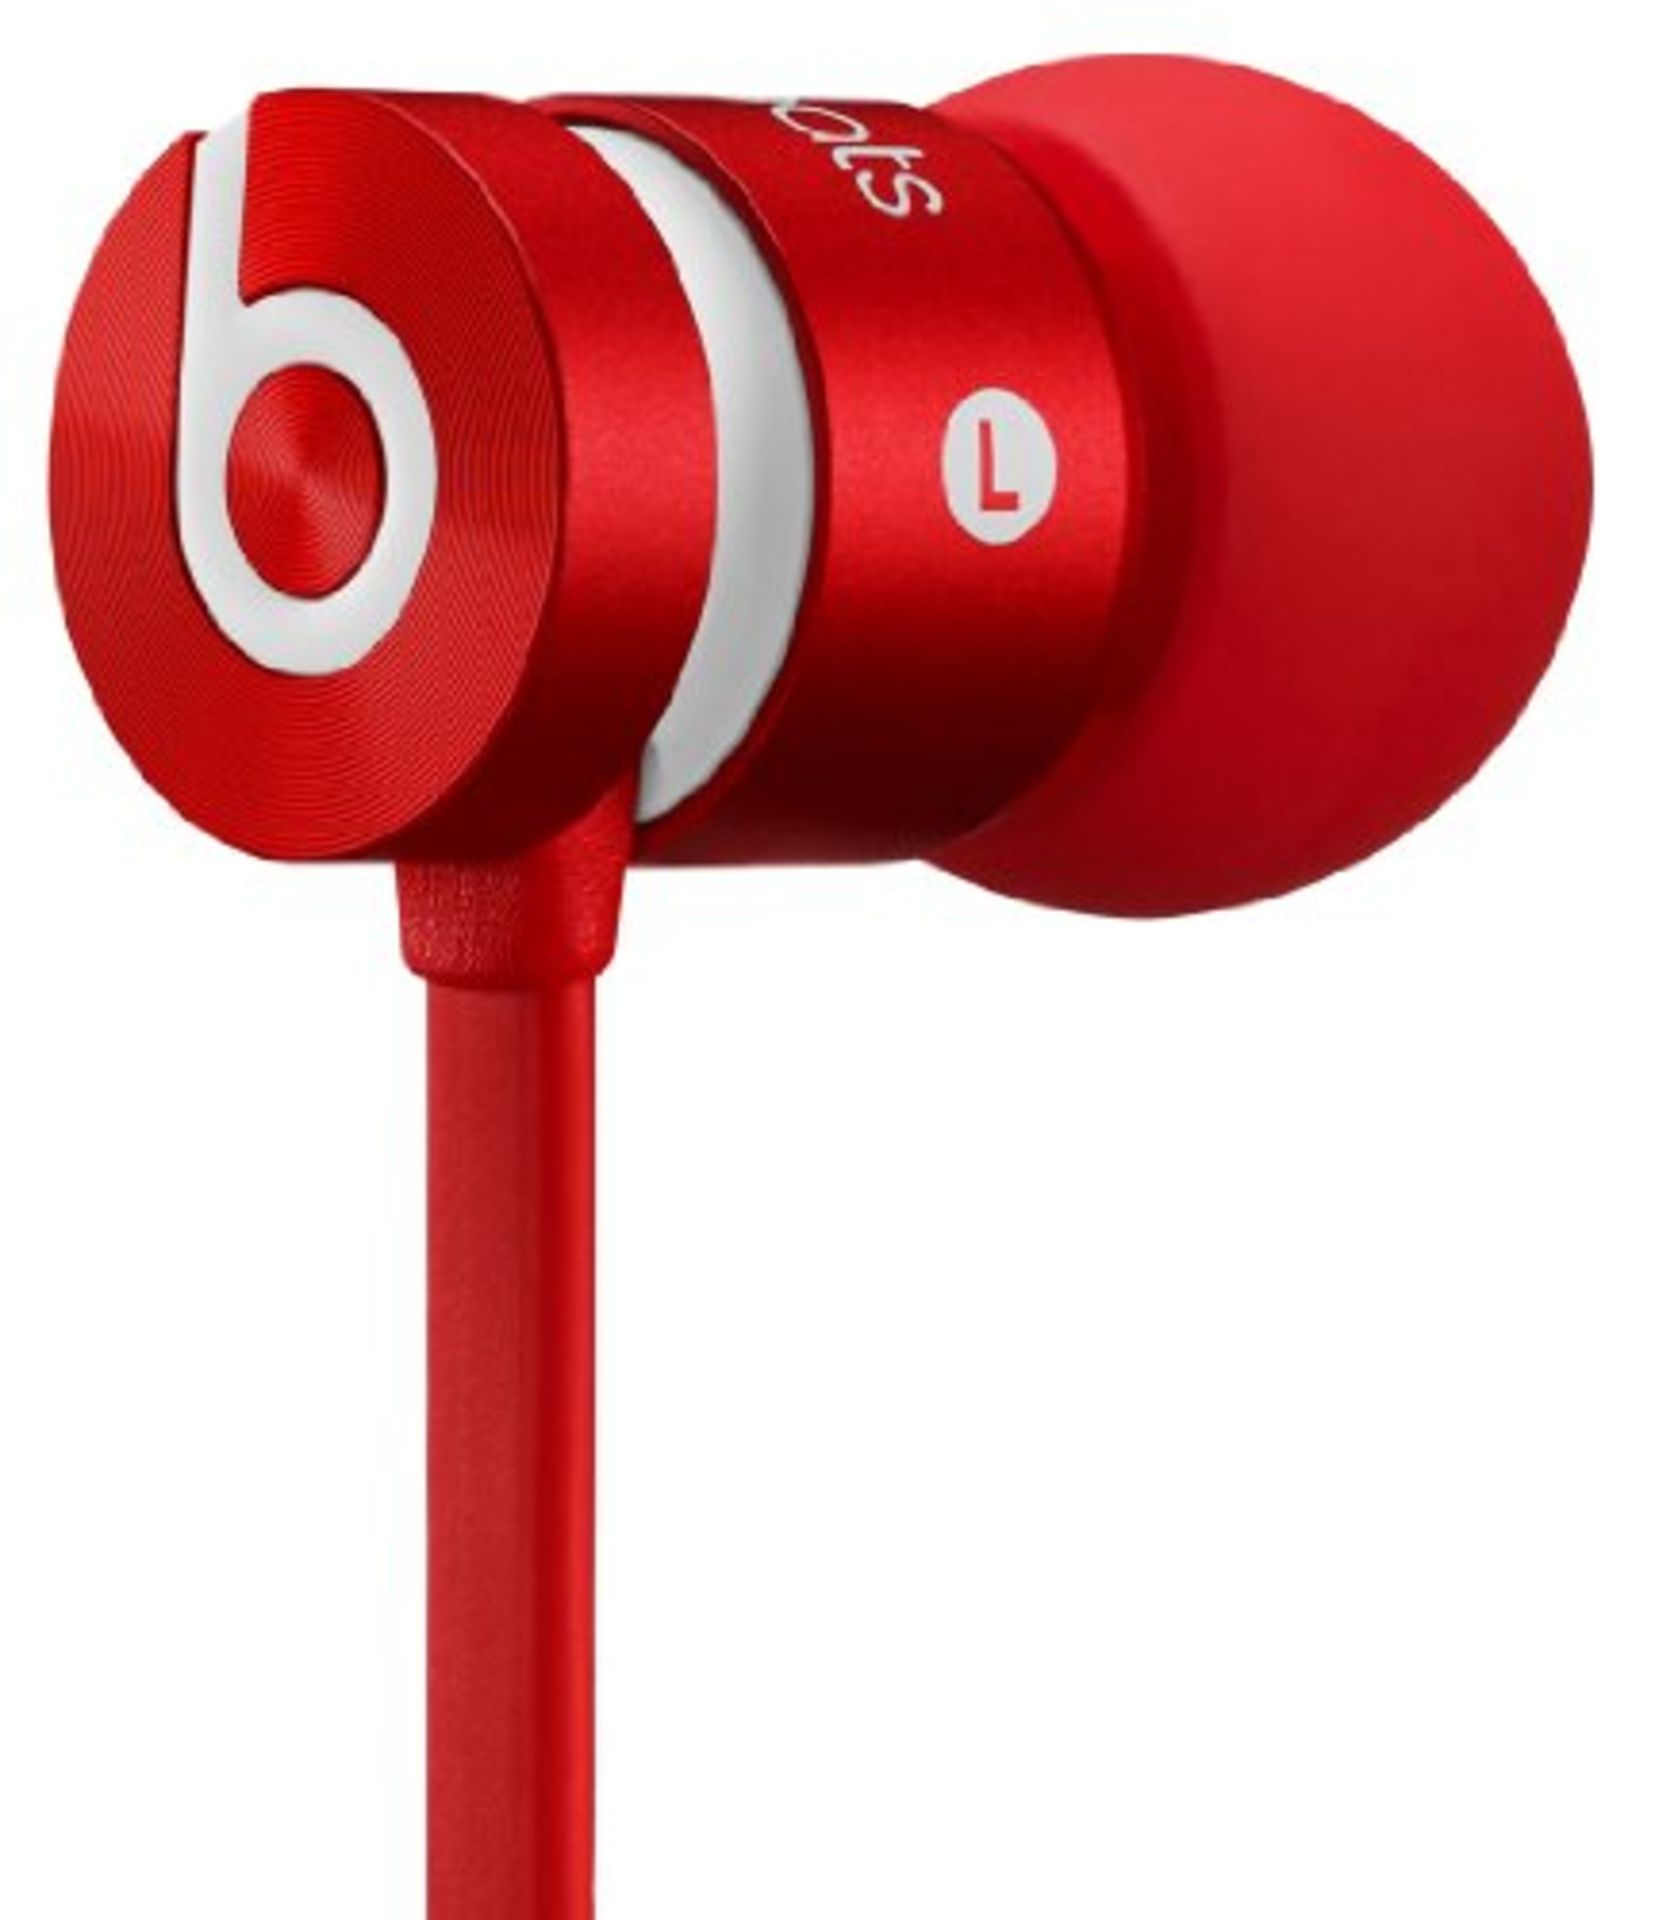 RRP £99.00 Beats by Dr. Dre urBeats In-Ear Headphones - Monochromatic Red - Image 2 of 2